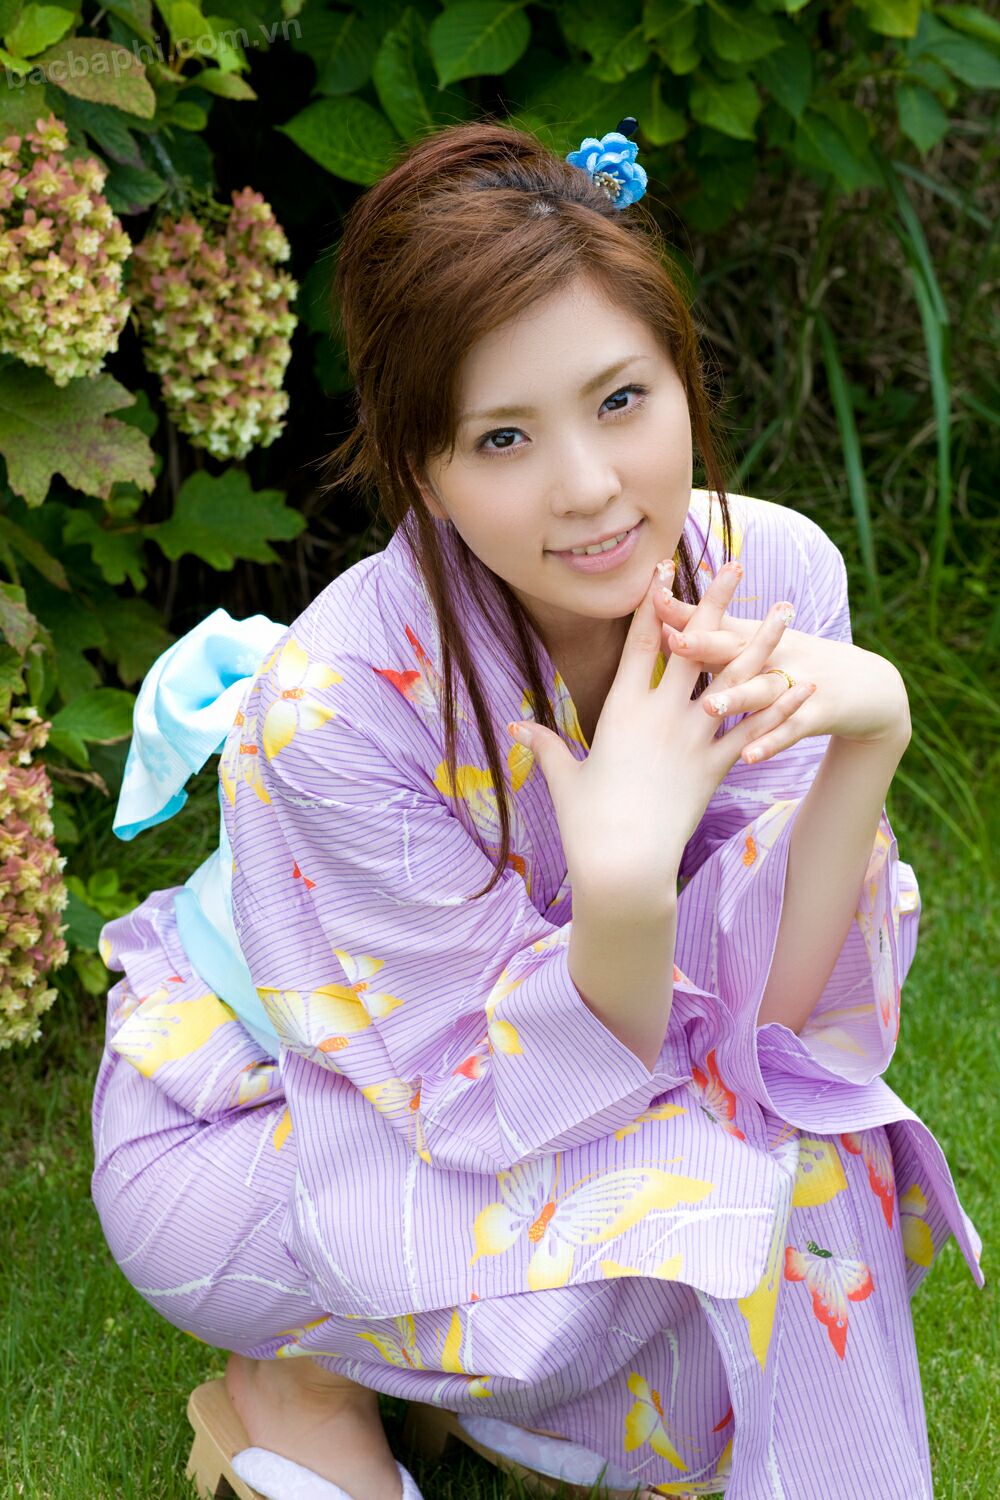 The Japanese Traditional Hairstyle Picture - Samuel Blog: The Japanese